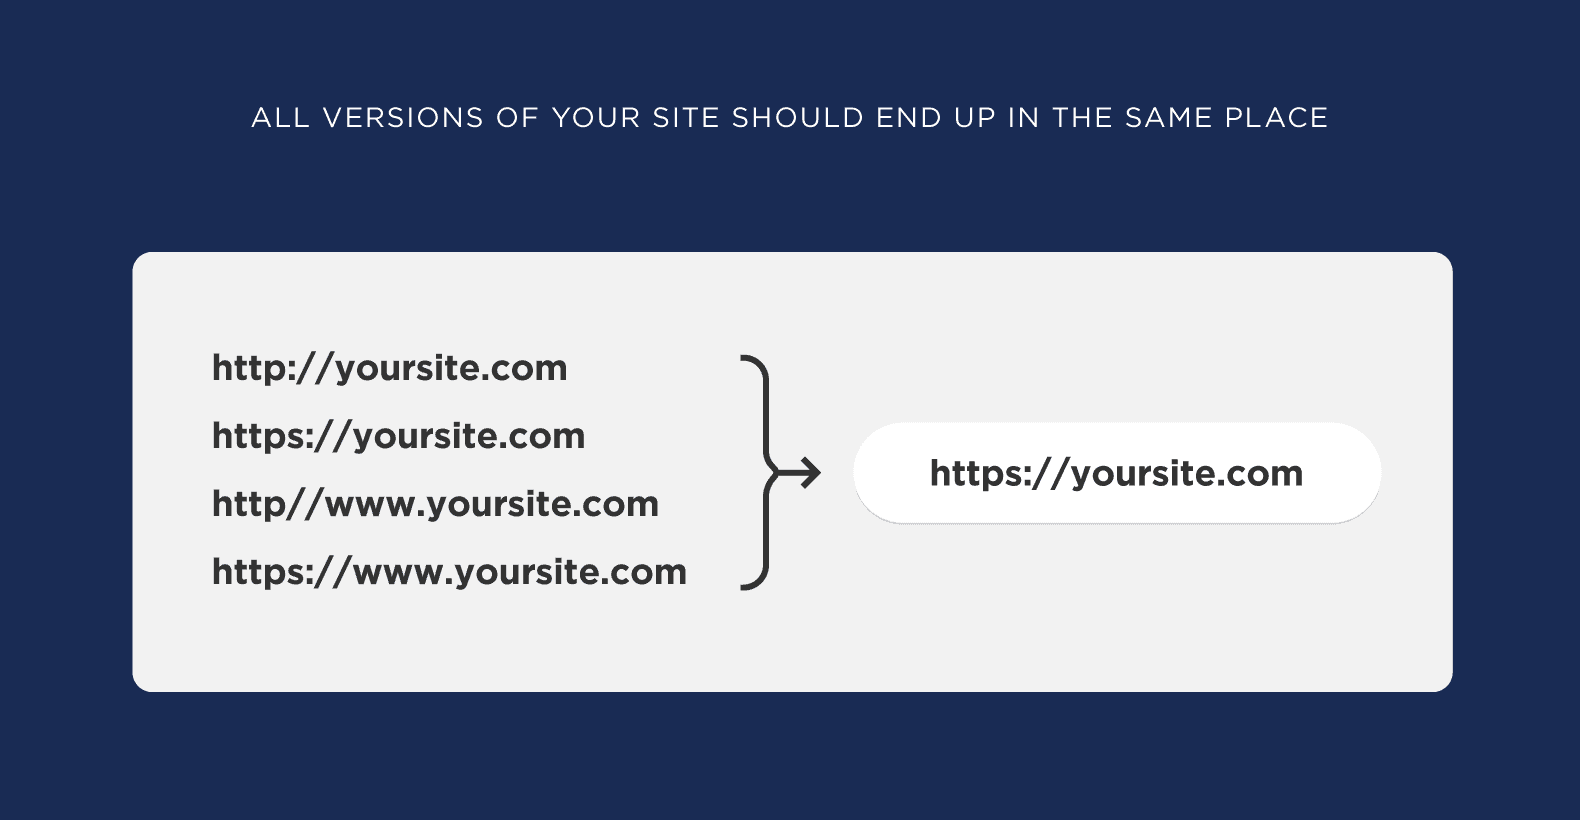 All versions of your site should end up in the same place